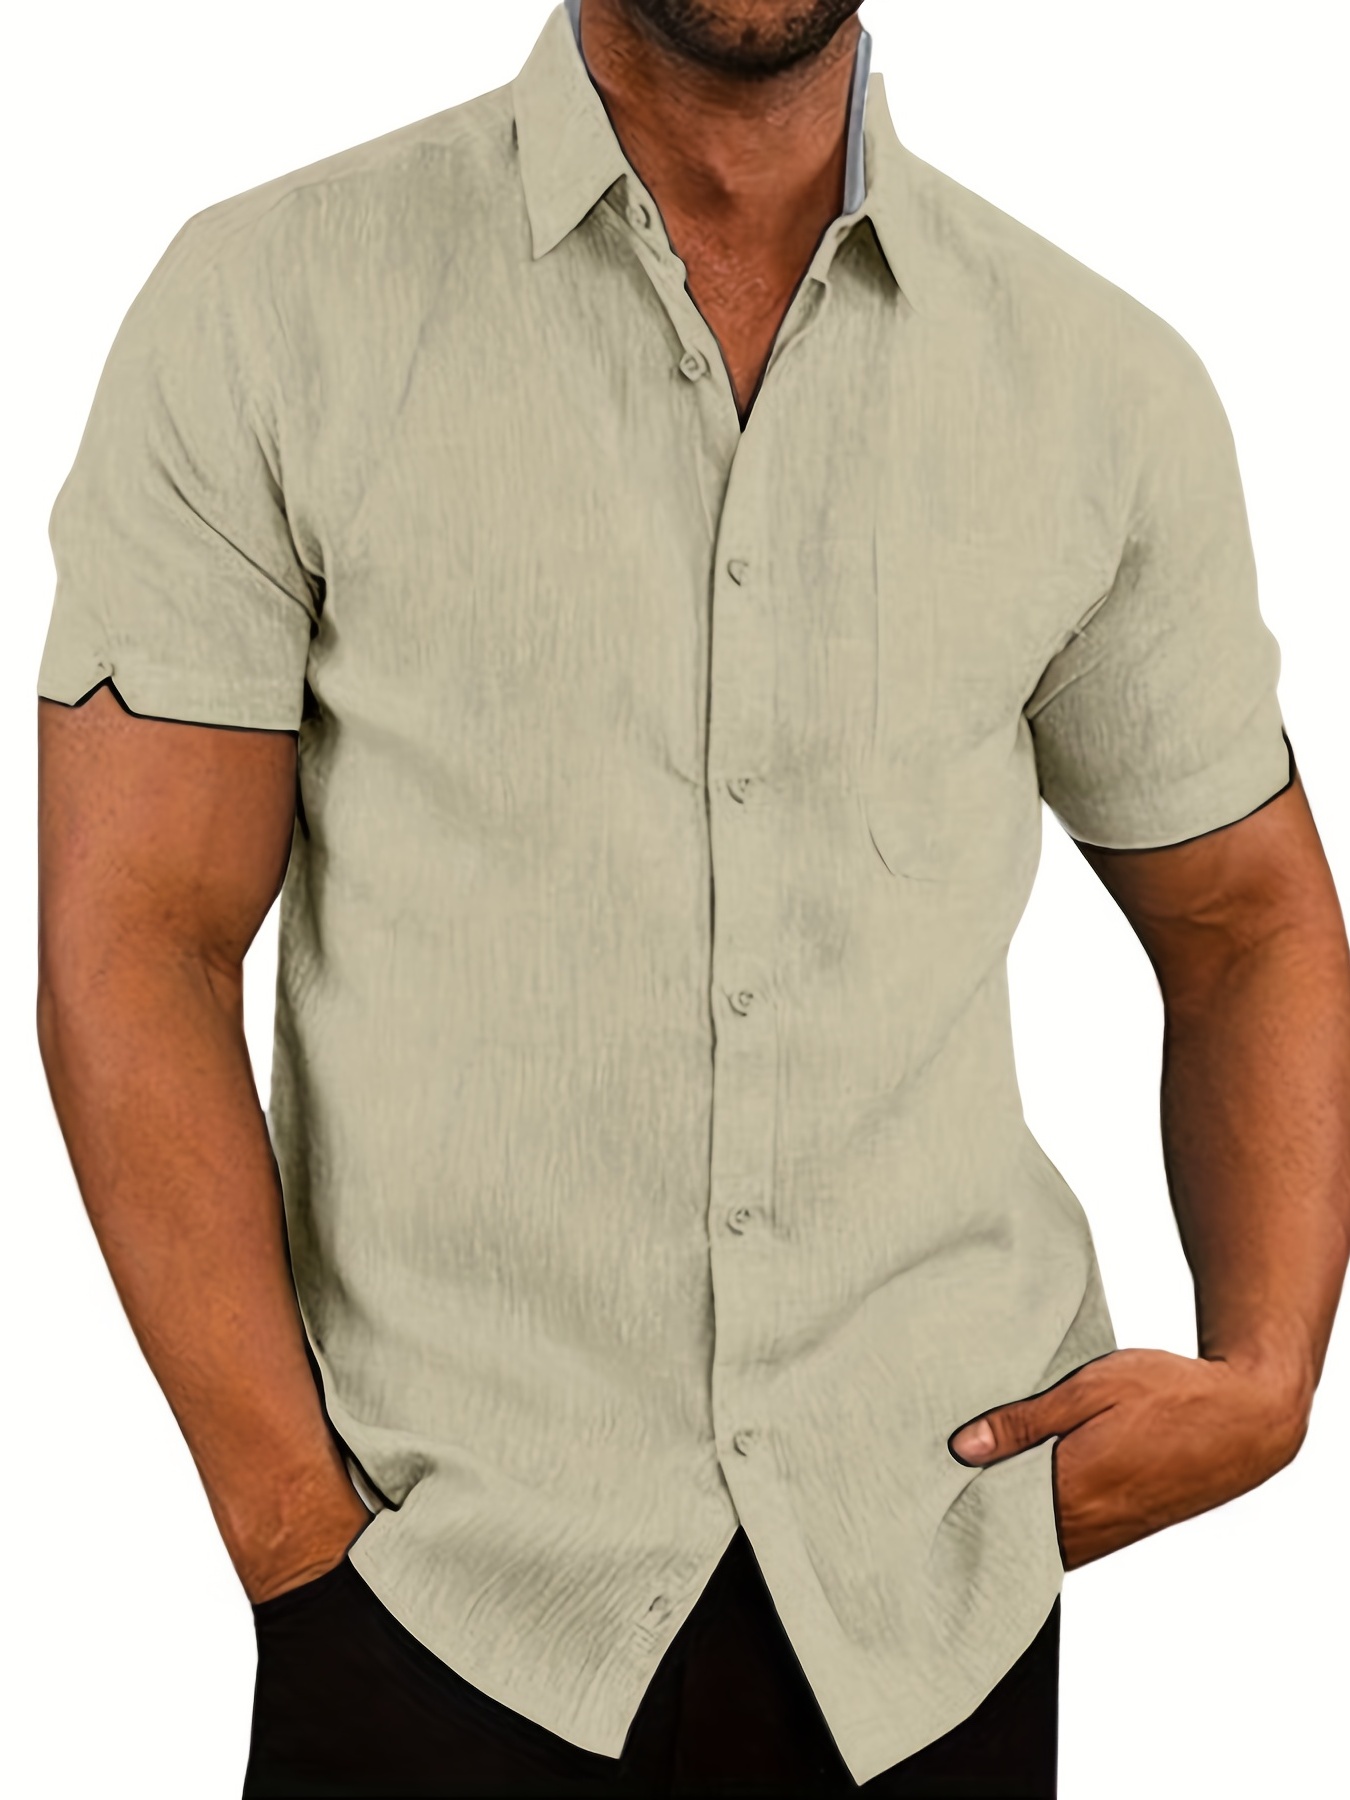 classic solid color mens casual short sleeve shirt mens thin shirt for spring summer vacation resort